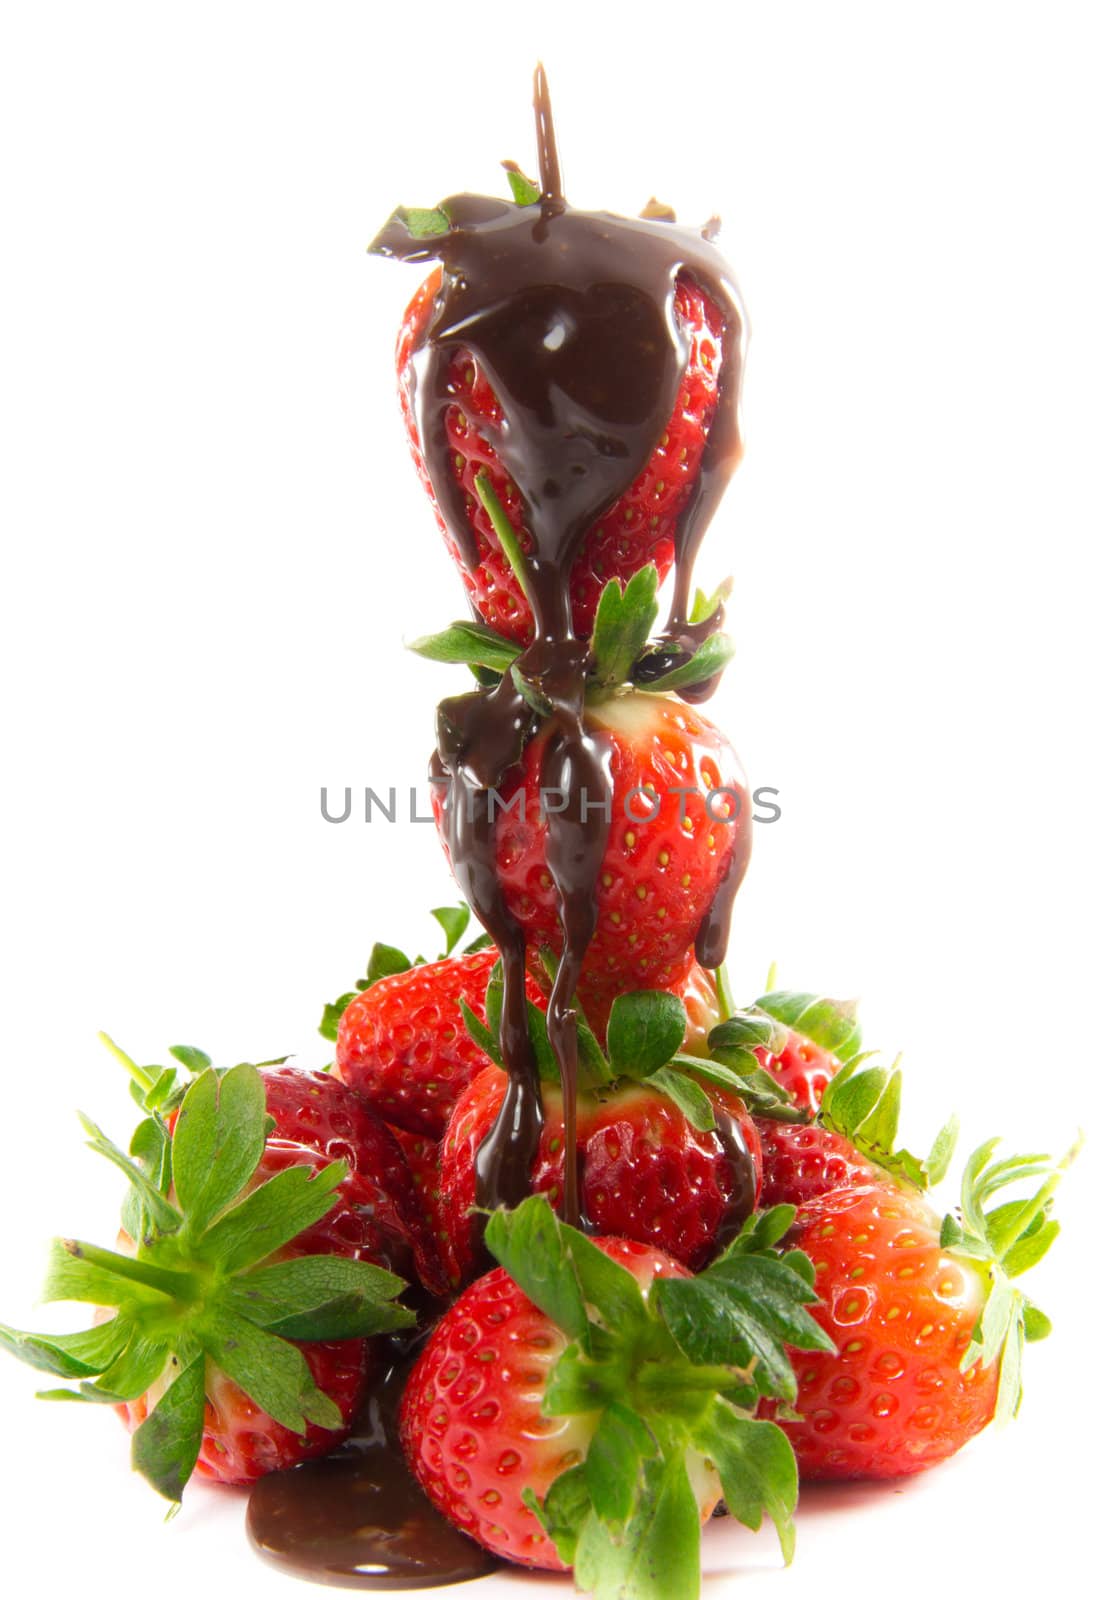 A picture of melted chocolate that is poured over a tower of strawberries